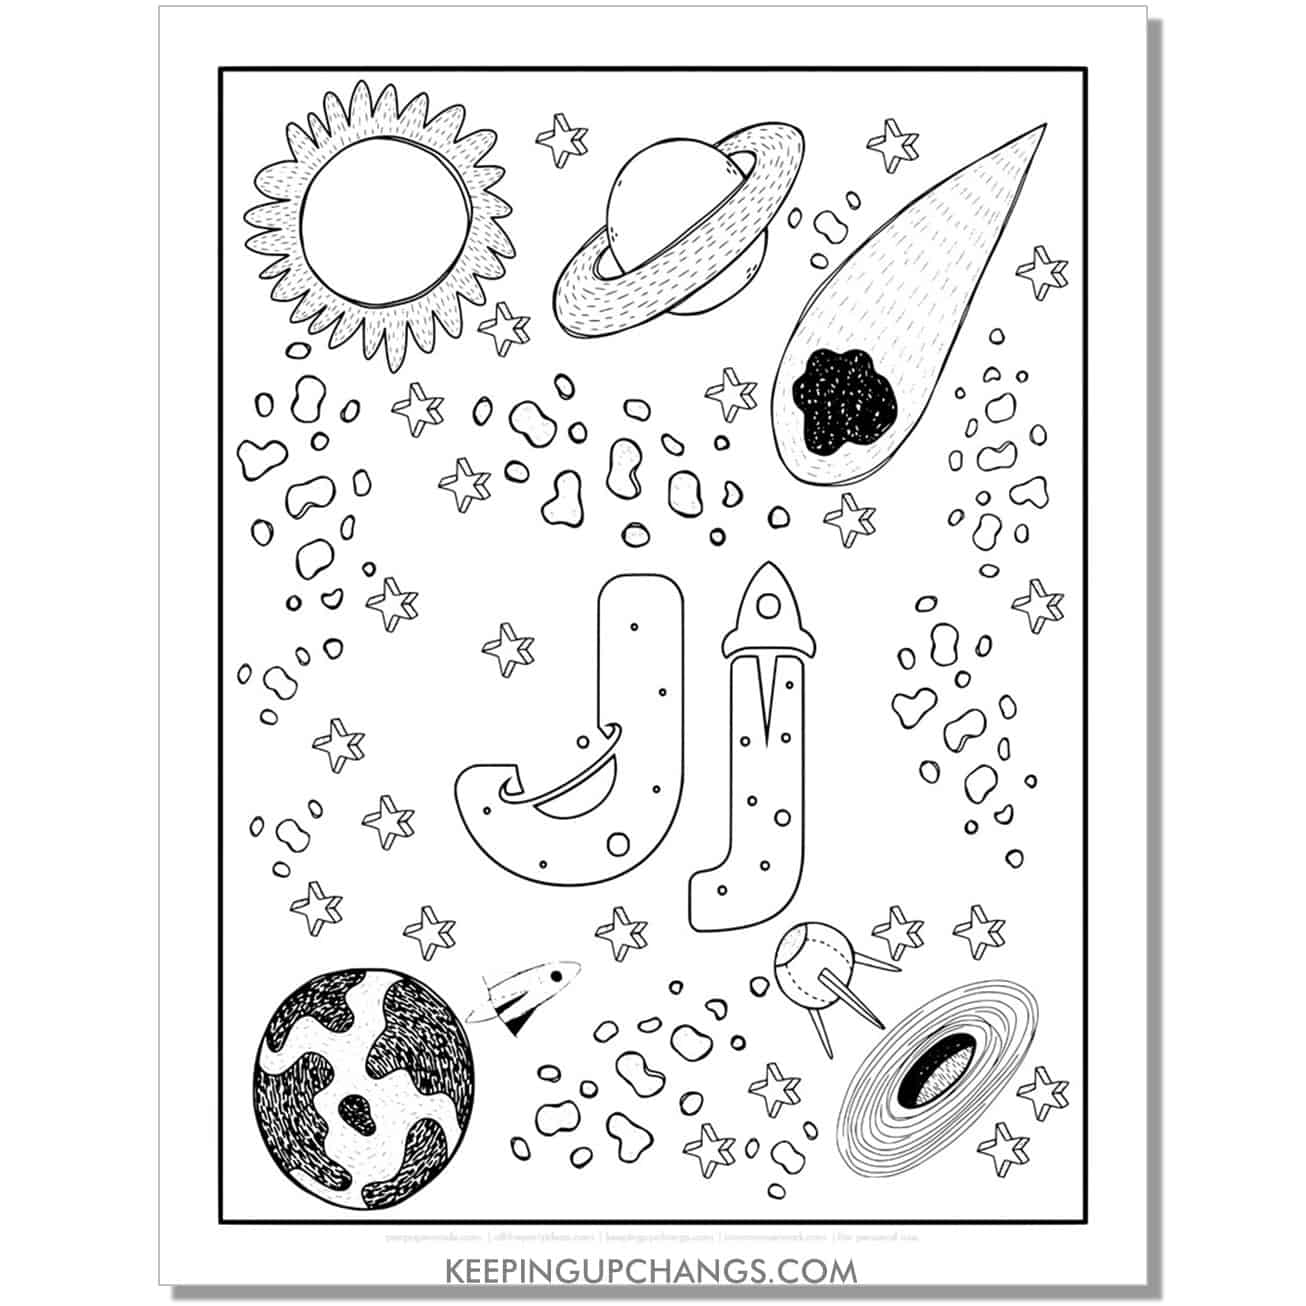 free alphabet letter j coloring page for kids with rockets, space theme.